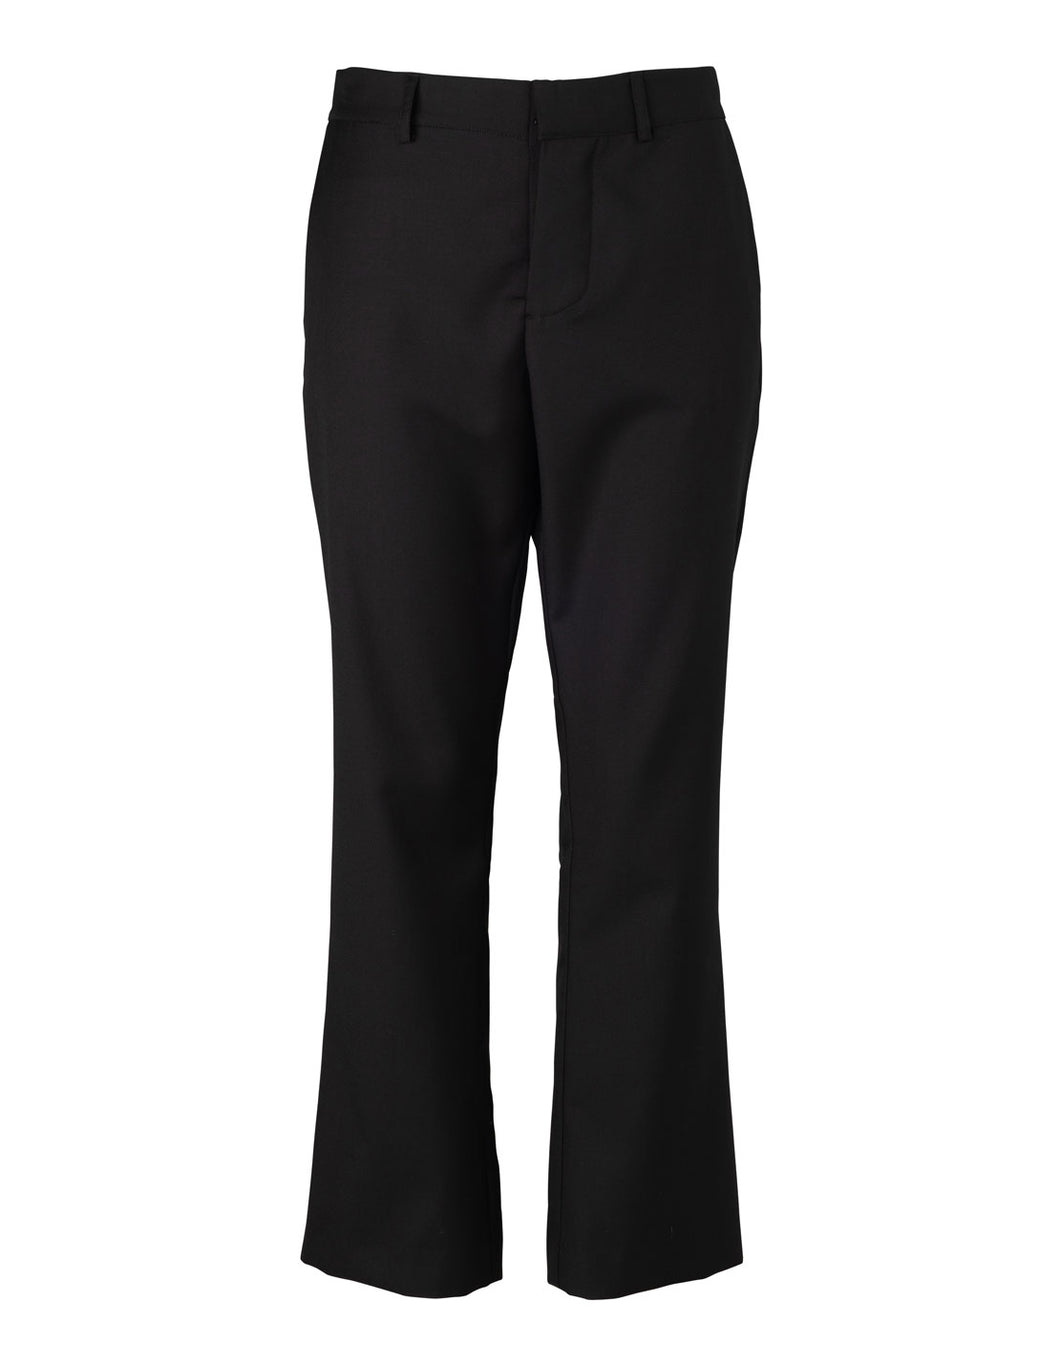 THE TAILORED TROUSER